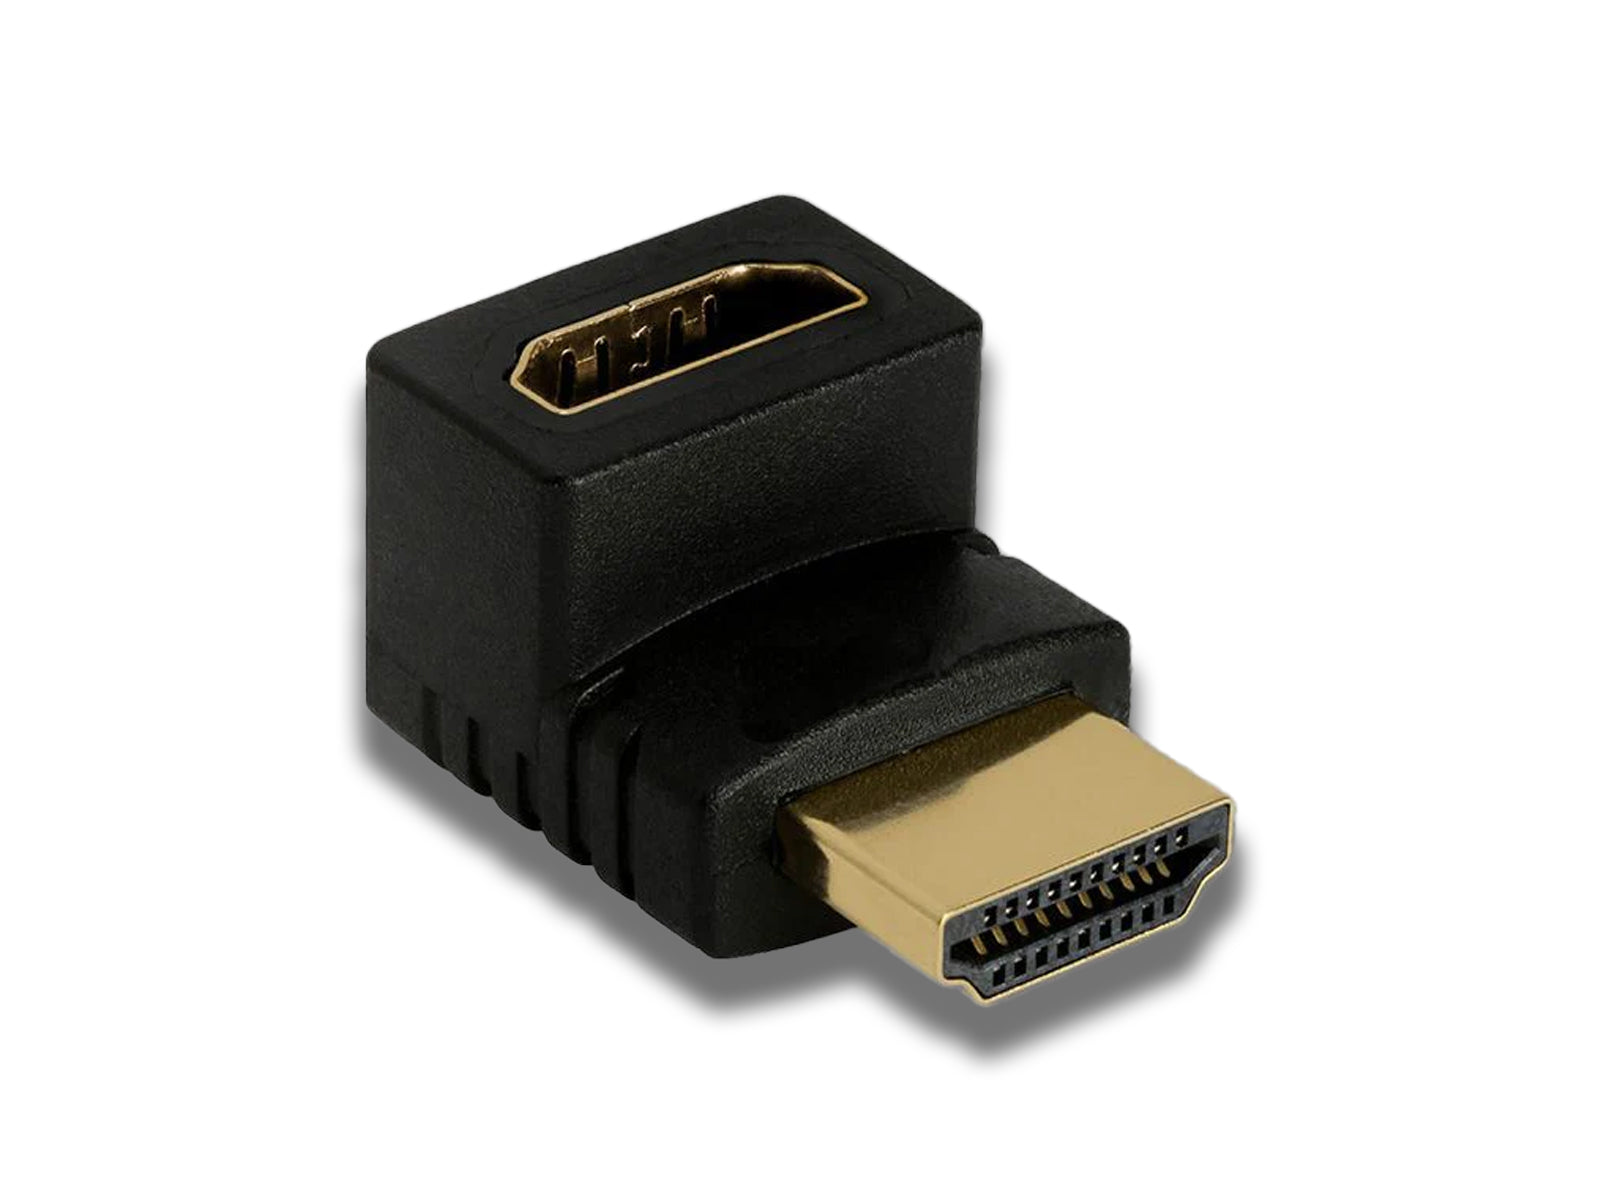 Image-of-the-Right-angle-4k-hdmi-adapter-on-the-white-background